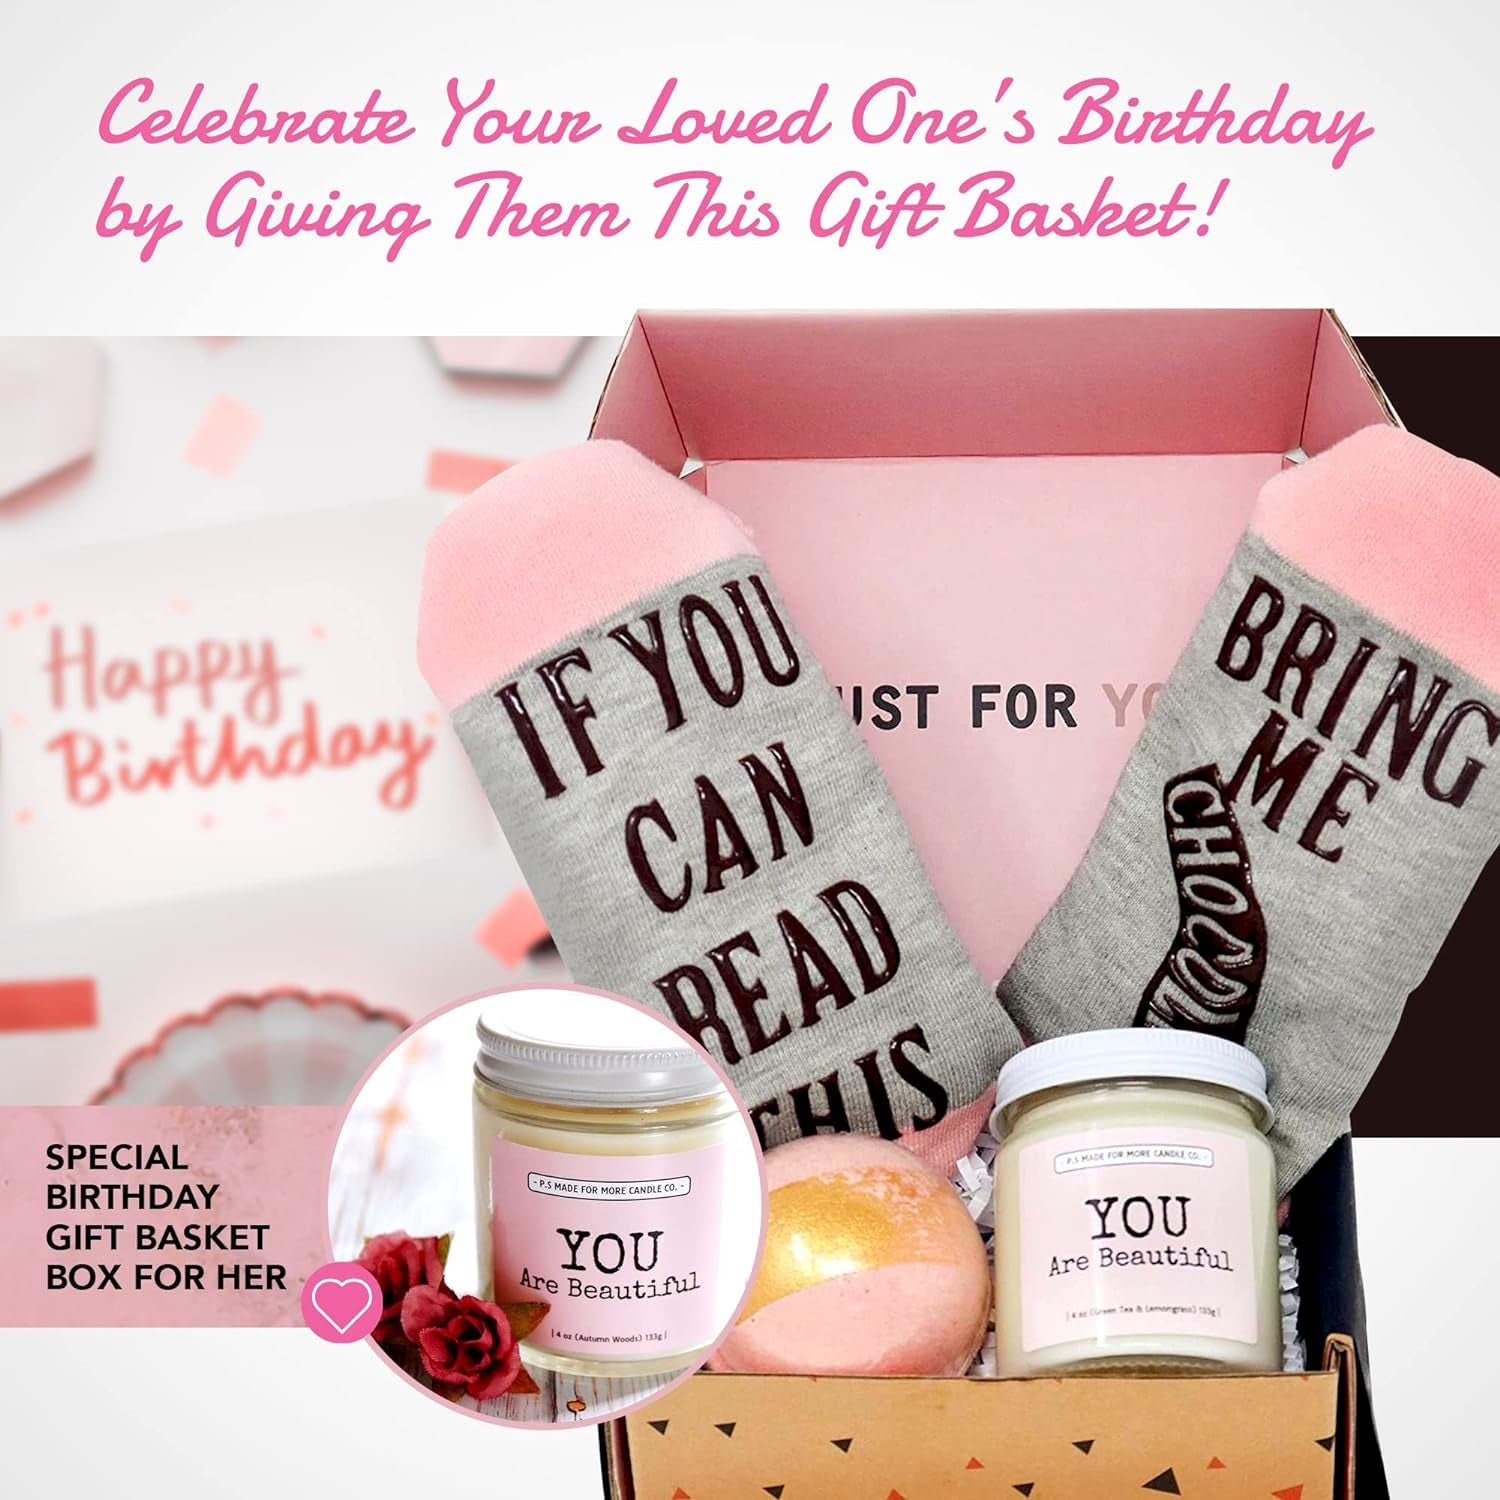 Birthday Mother'S Day Women Gift Basket Box for Her- Pack of 3 Fun Unique Gifts with Soy Candle, Bath Bomb, Funny Socks, Mother'S Day Gift Sets for Women